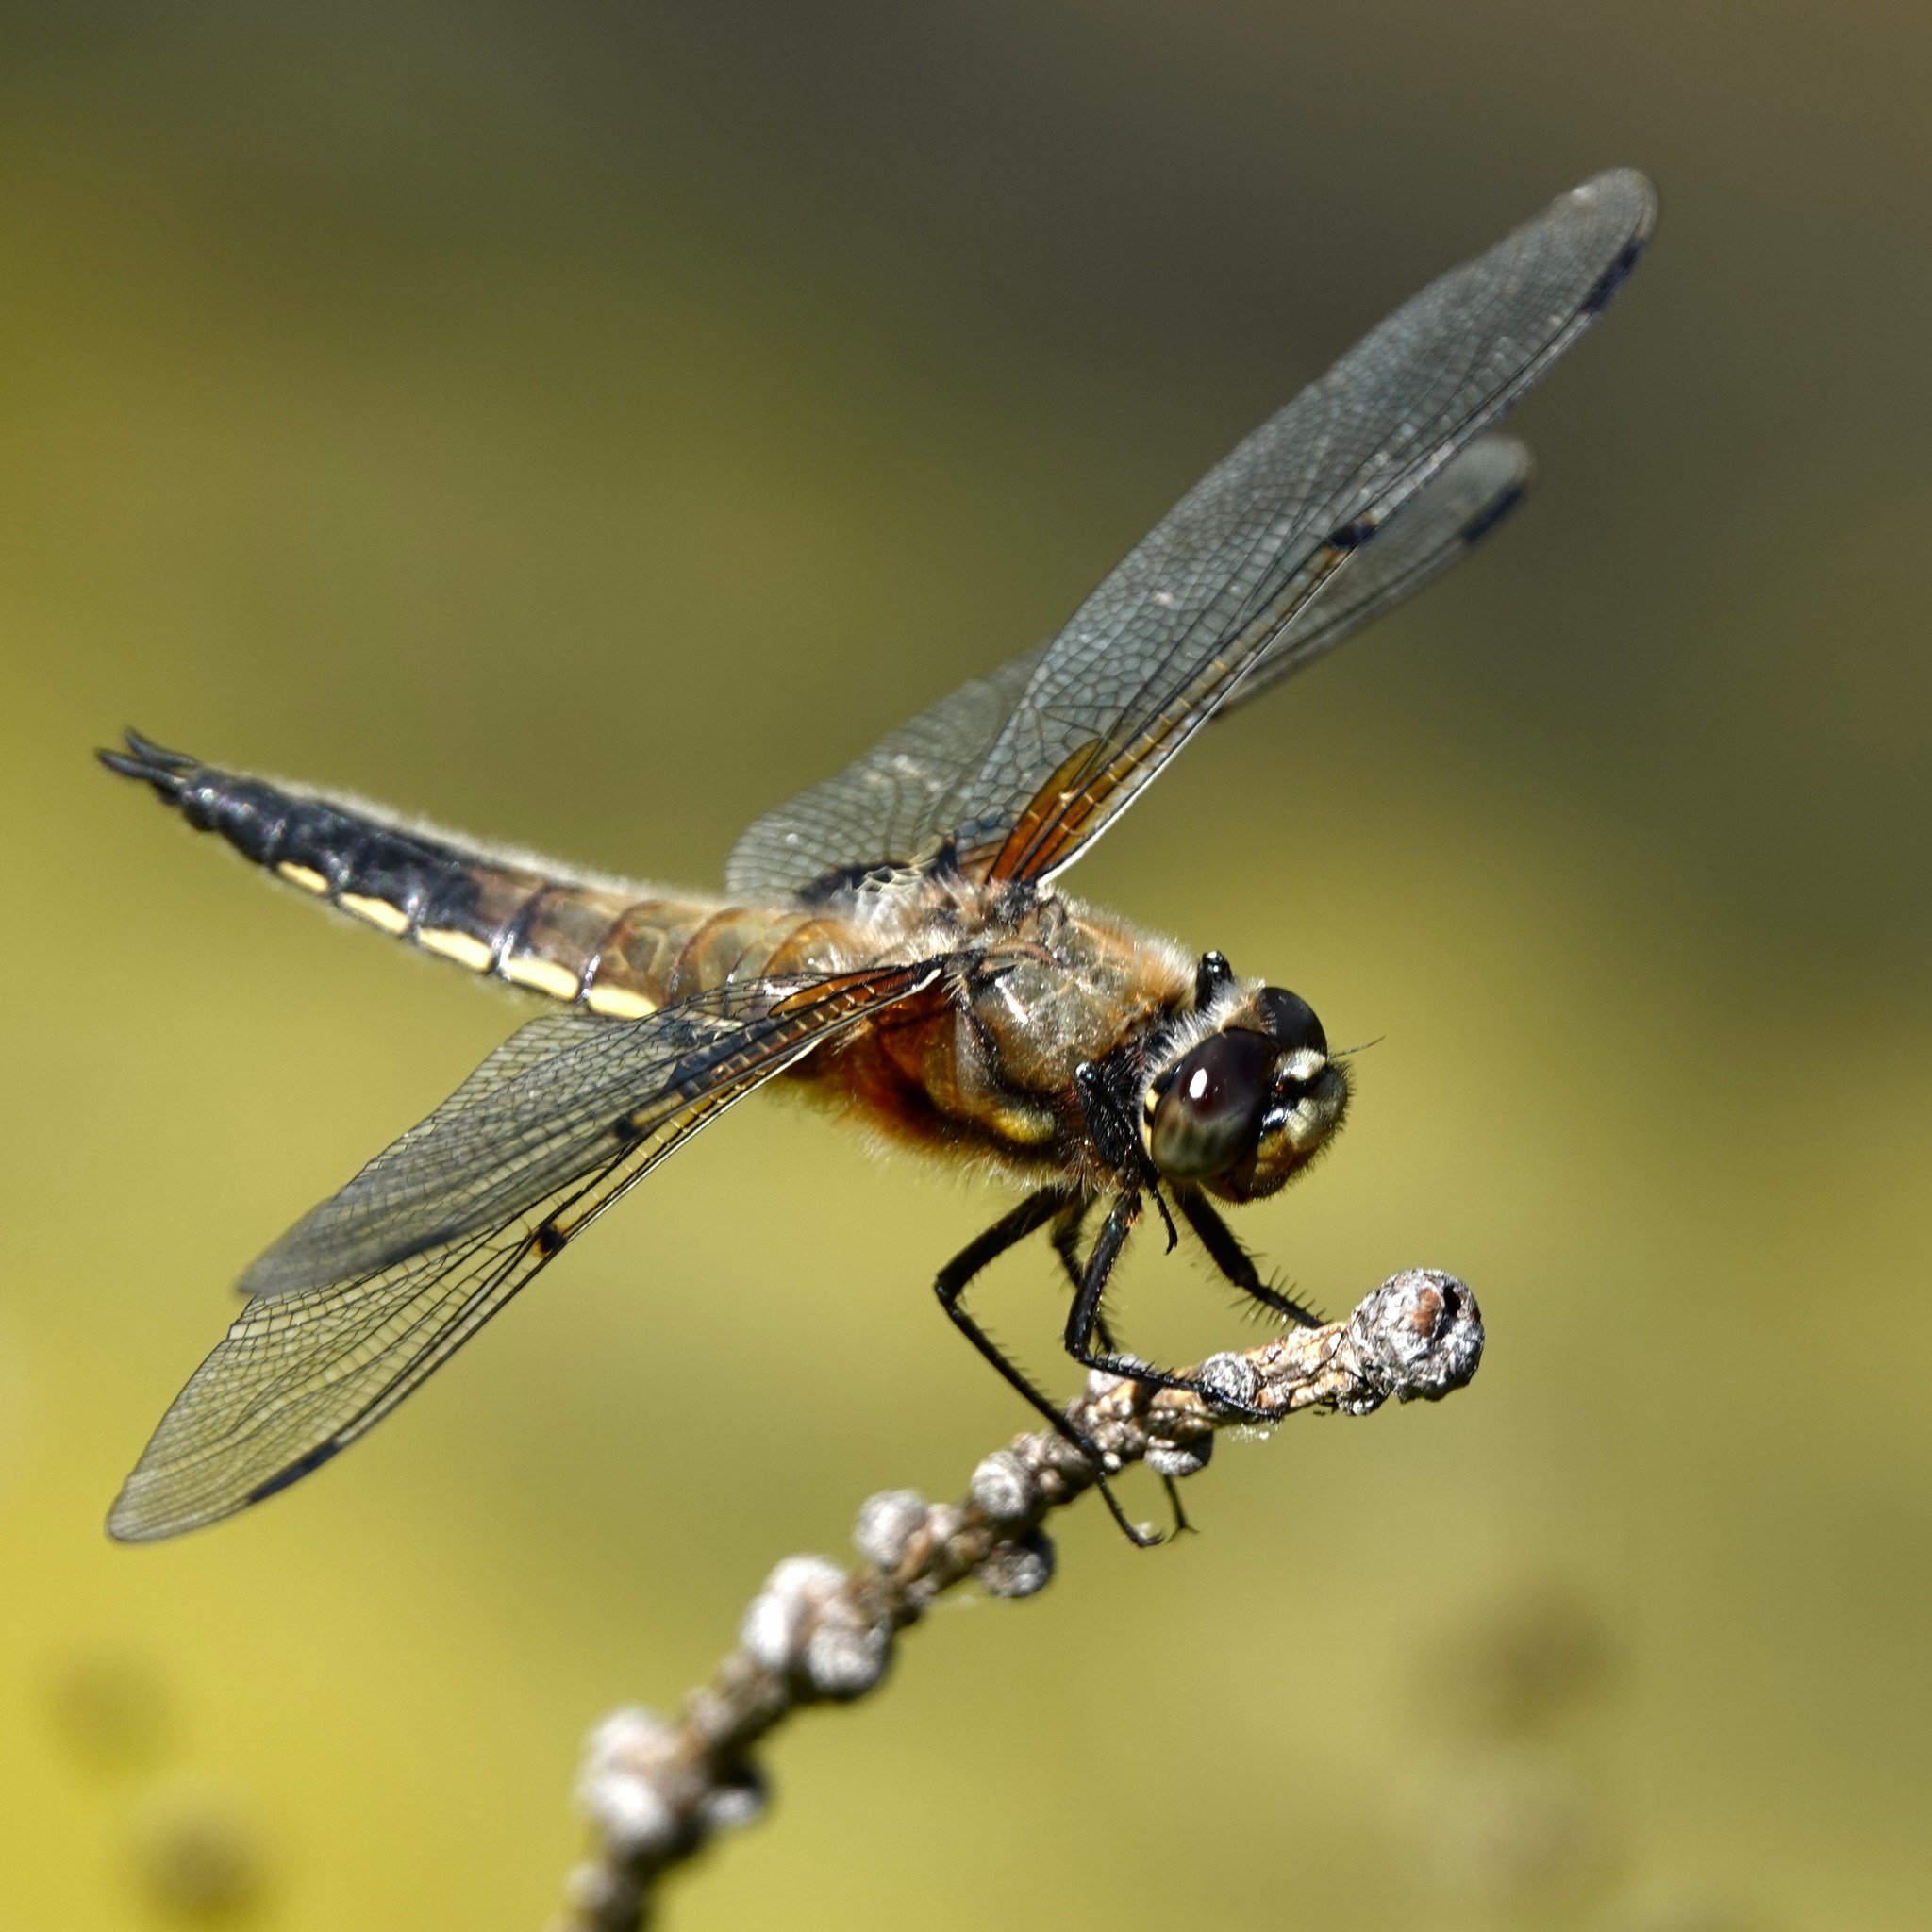 RBD #723 Four-spotted skimmer